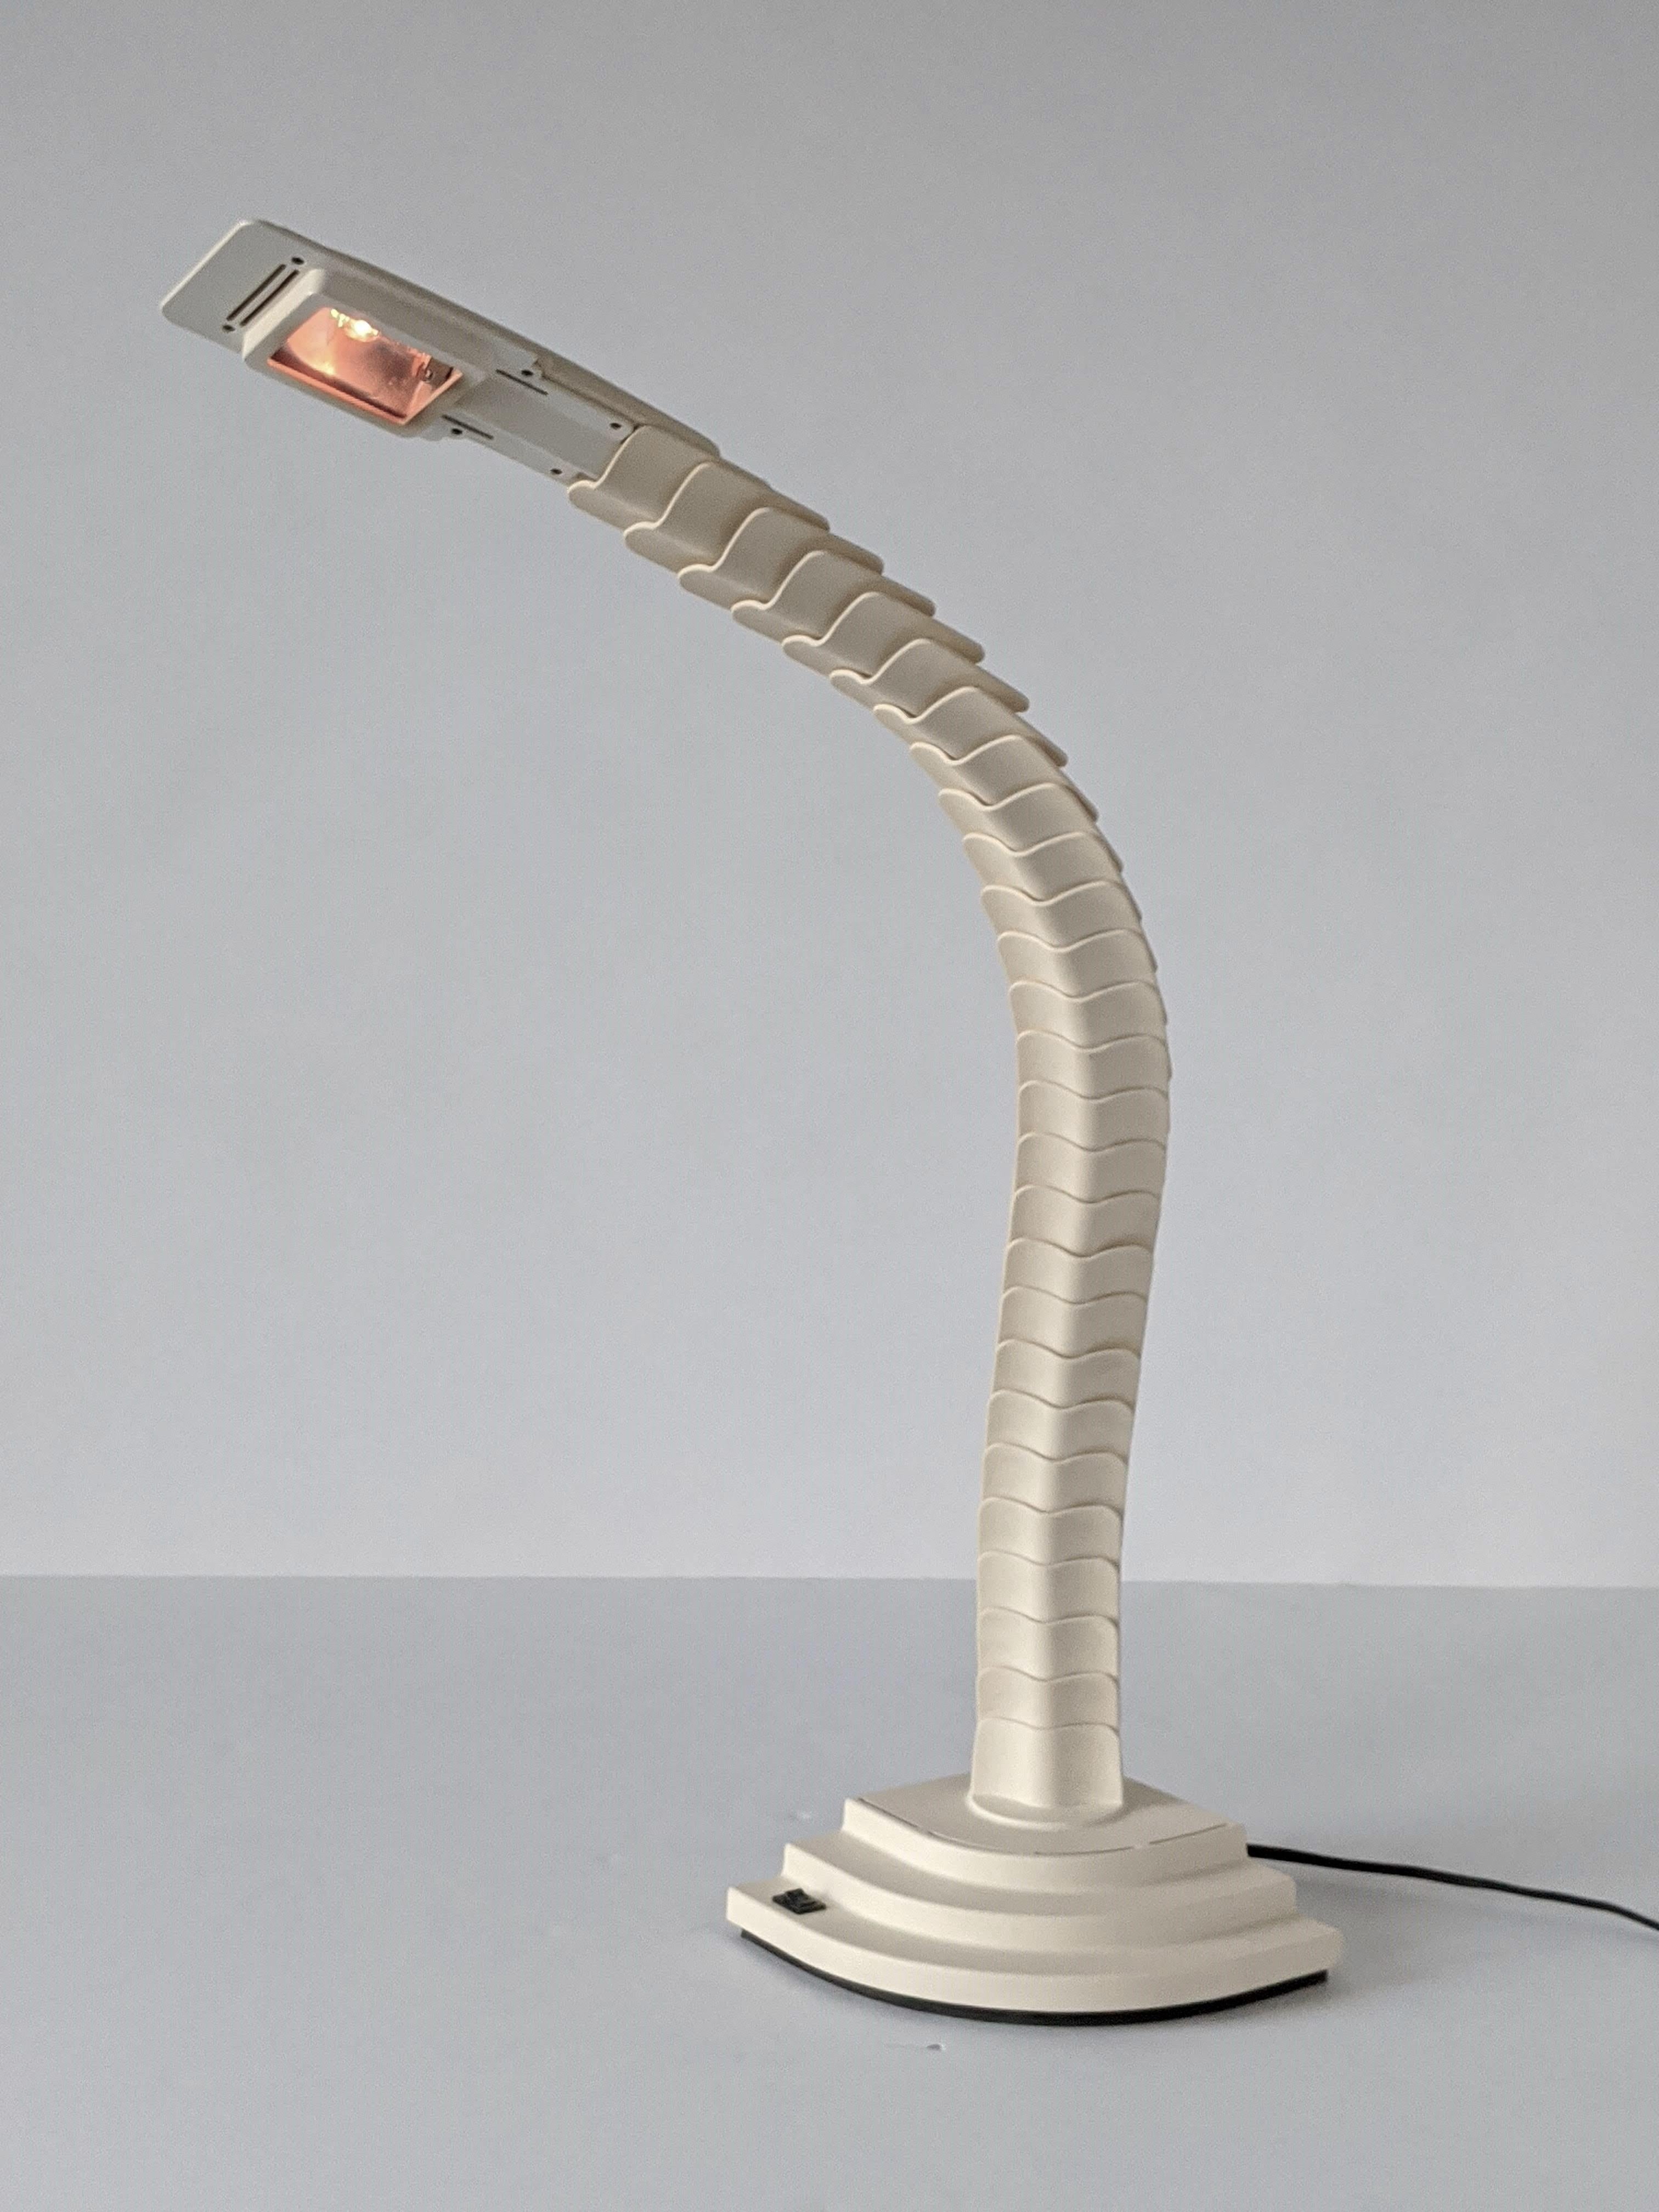 1970s Spine Shaped 'Proteo' Halogen Table Lamp, Italy For Sale 6